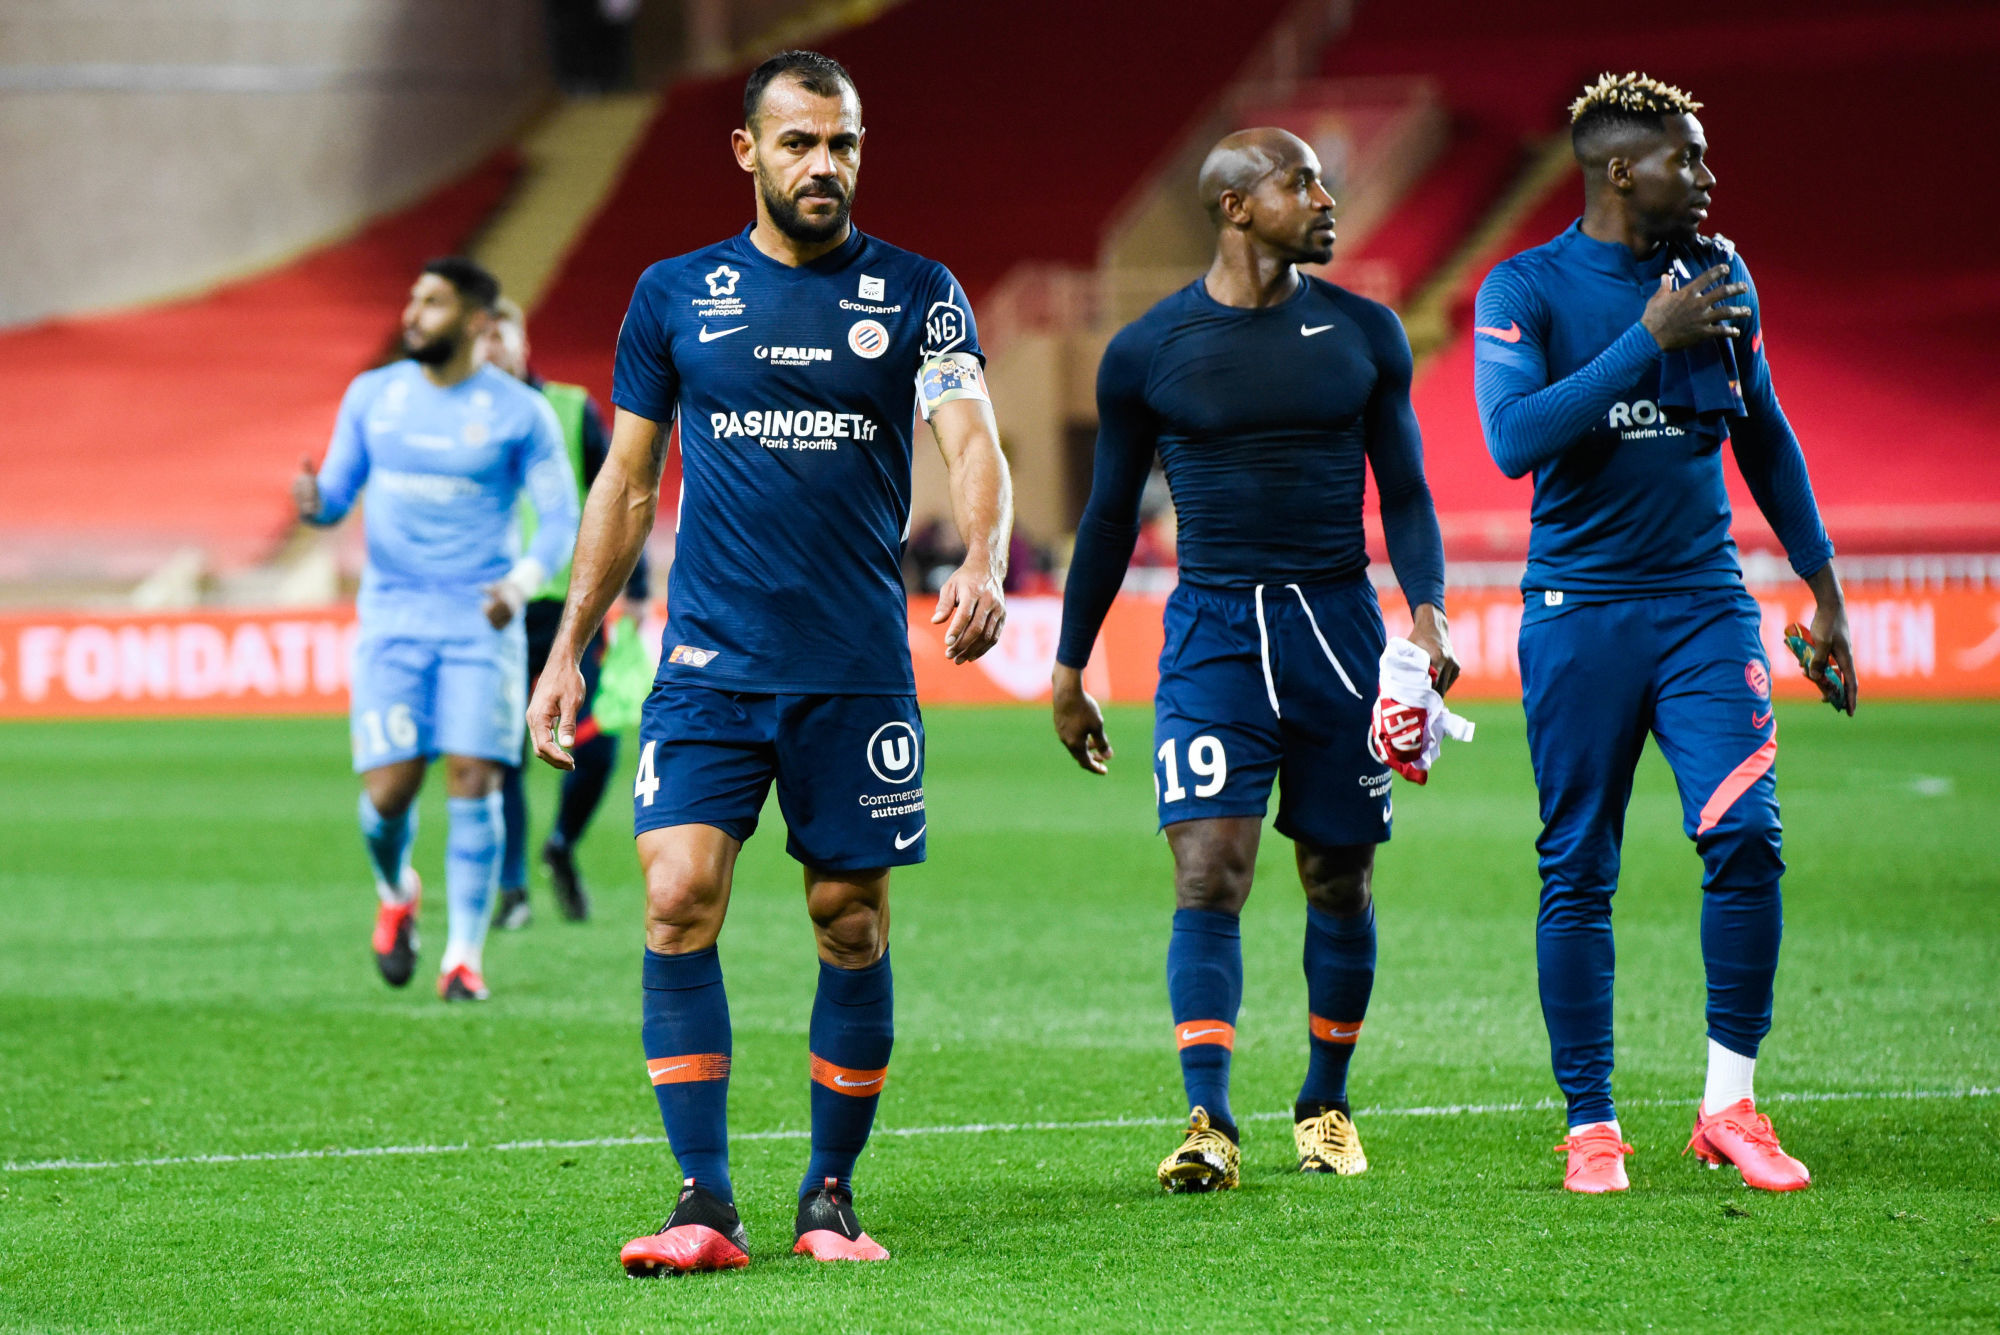 HILTON and Souleymane CAMARA of Montpellier during the Ligue 1 match between Monaco and Montpellier at Stade Louis II on February 14, 2020 in Monaco, Monaco. (Photo by Pascal Della Zuana/Icon Sport) - Vitorino HILTON - Souleymane CAMARA - Ambroise Oyongo BITOLO - Stade Louis-II - Monaco (France)